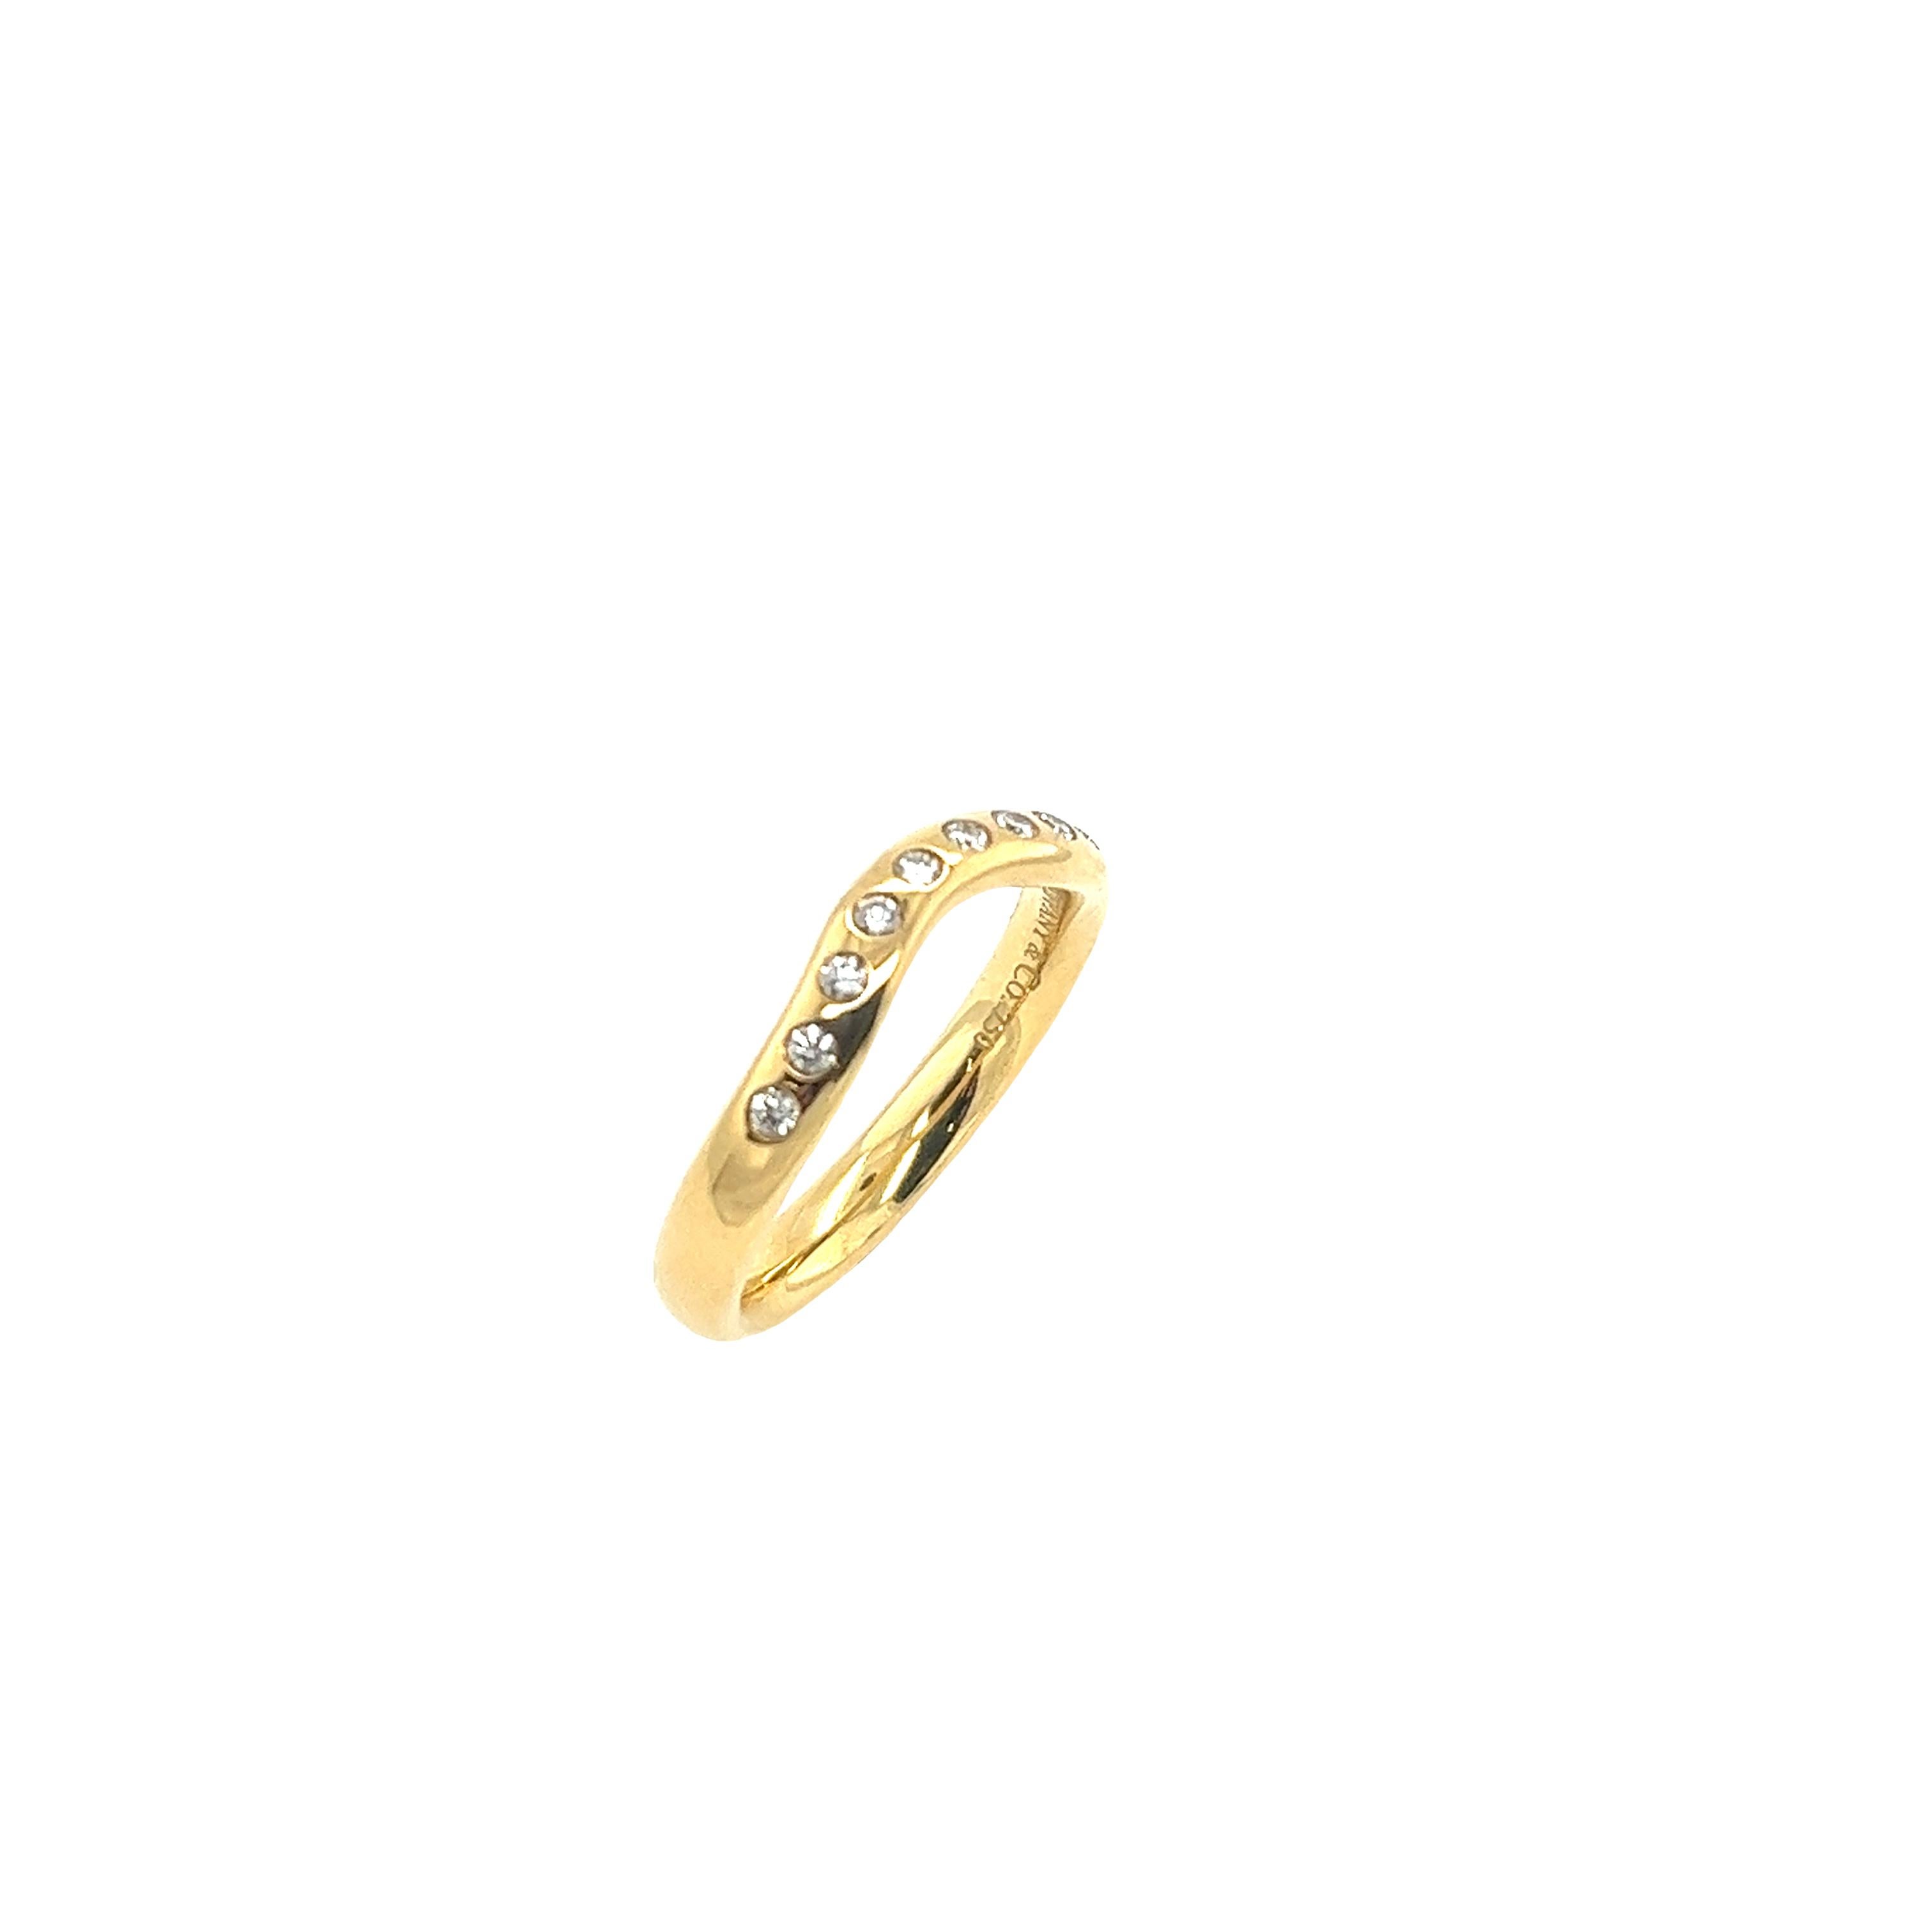 Women's Tiffany & Co. Elsa Peretti Wedding Band Set With 9 Diamonds in 18ct Yellow Gold For Sale